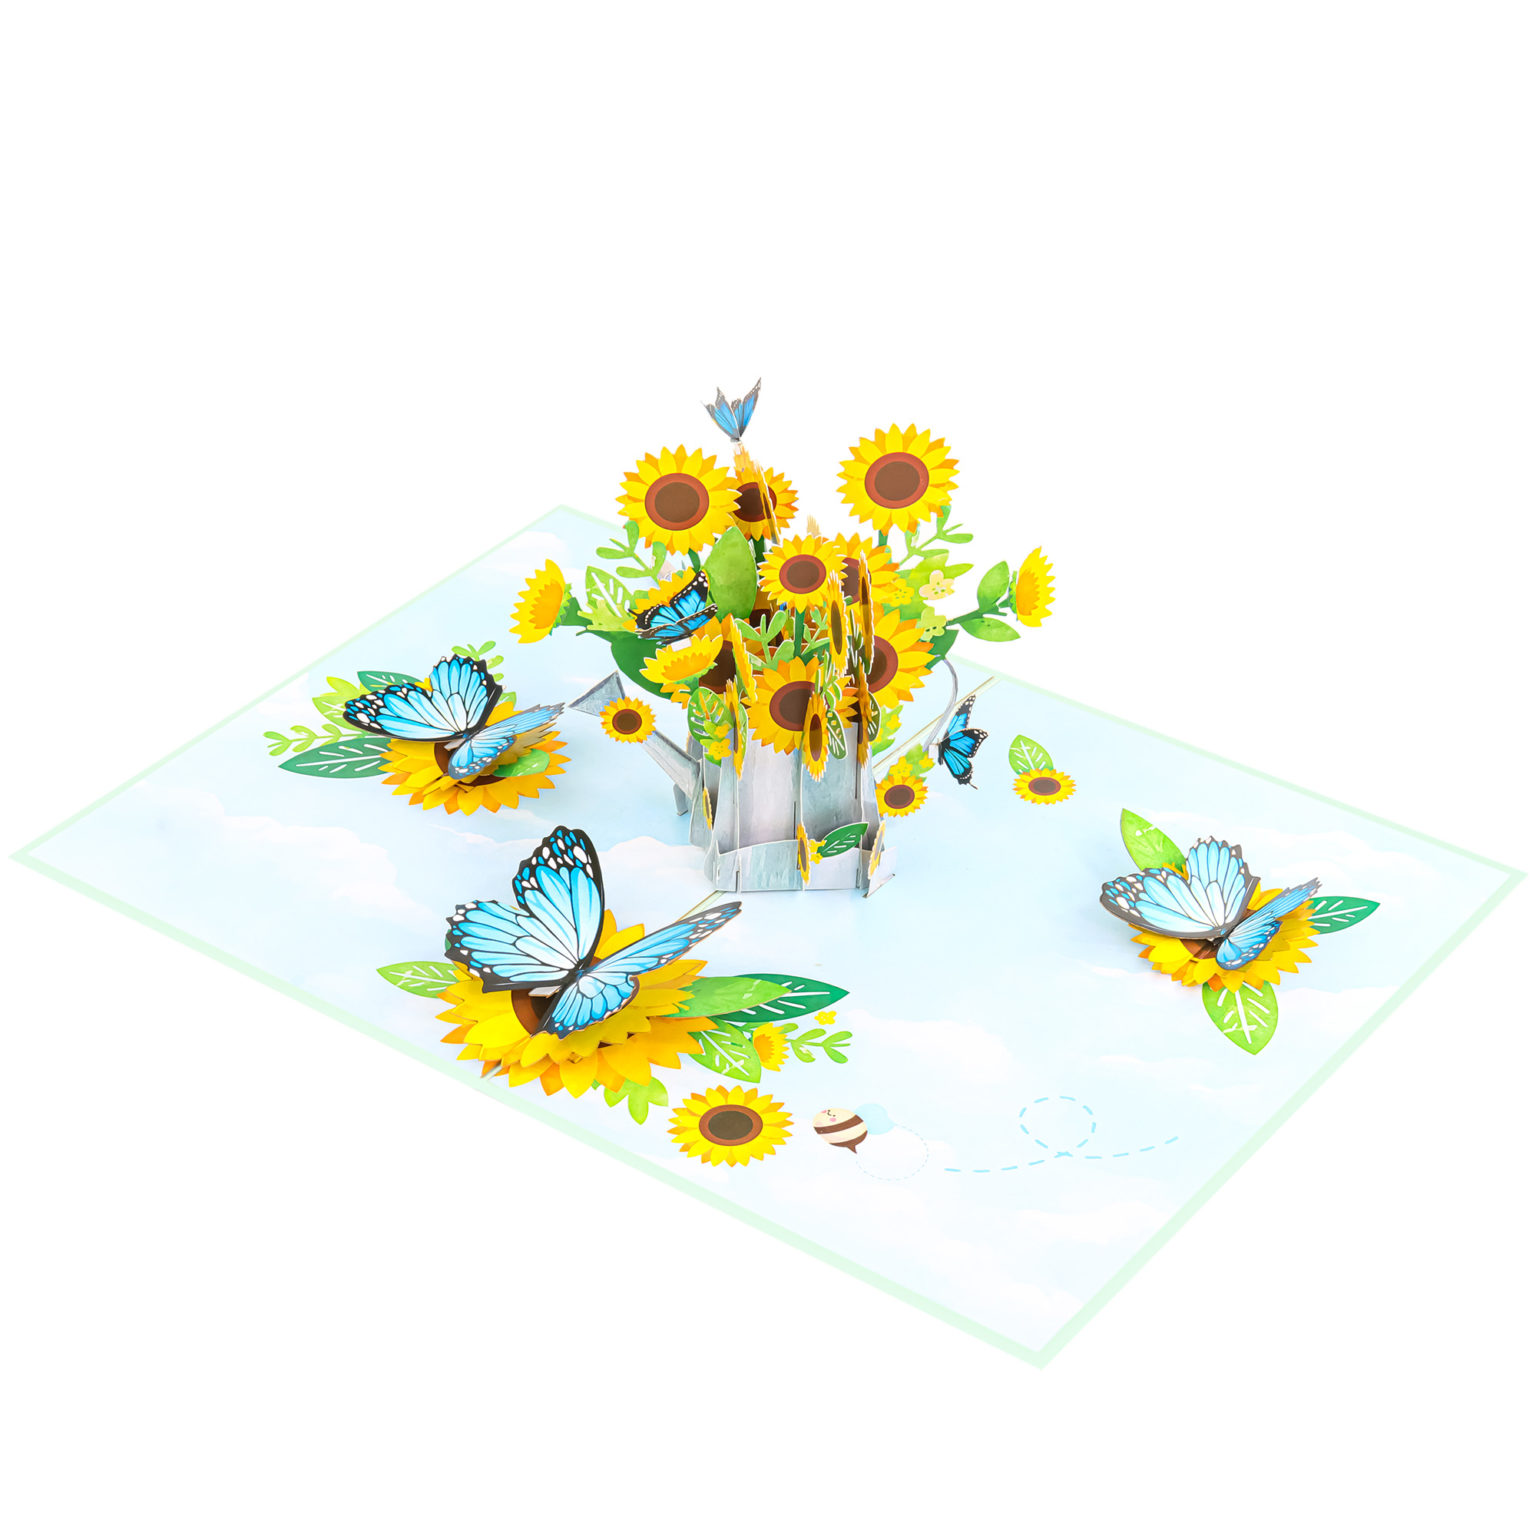 Watering-Can-Sunflower-Bouquet-Pop-Up-Card-overview-wholesale-manufacture-custom-design-custom-custom-pop-up-birthday-card-just-because-pop-up-card-summer